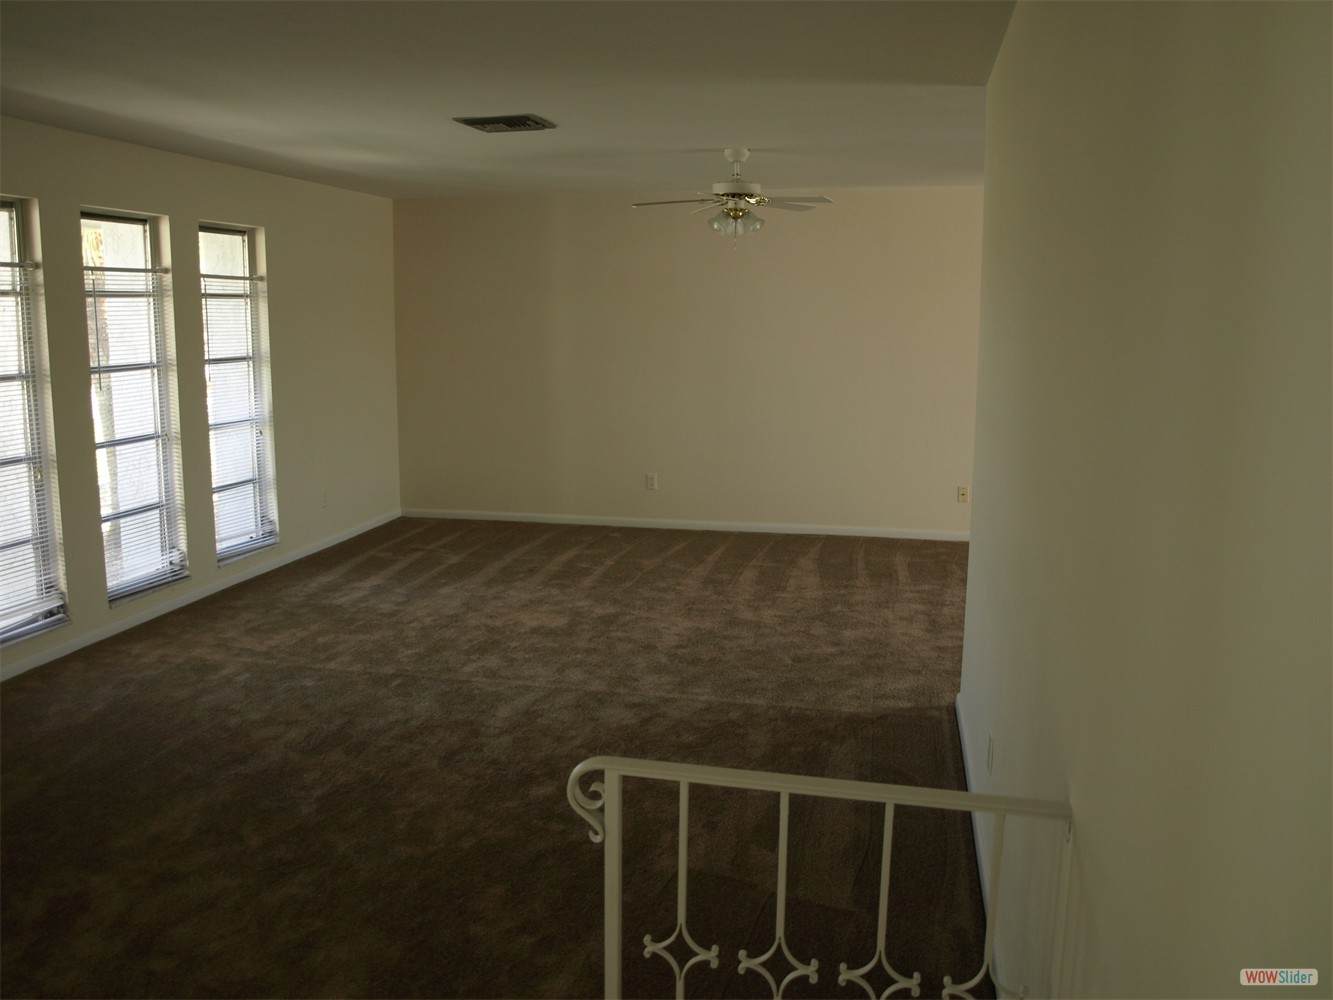 The empty front room as seen from the hall ...